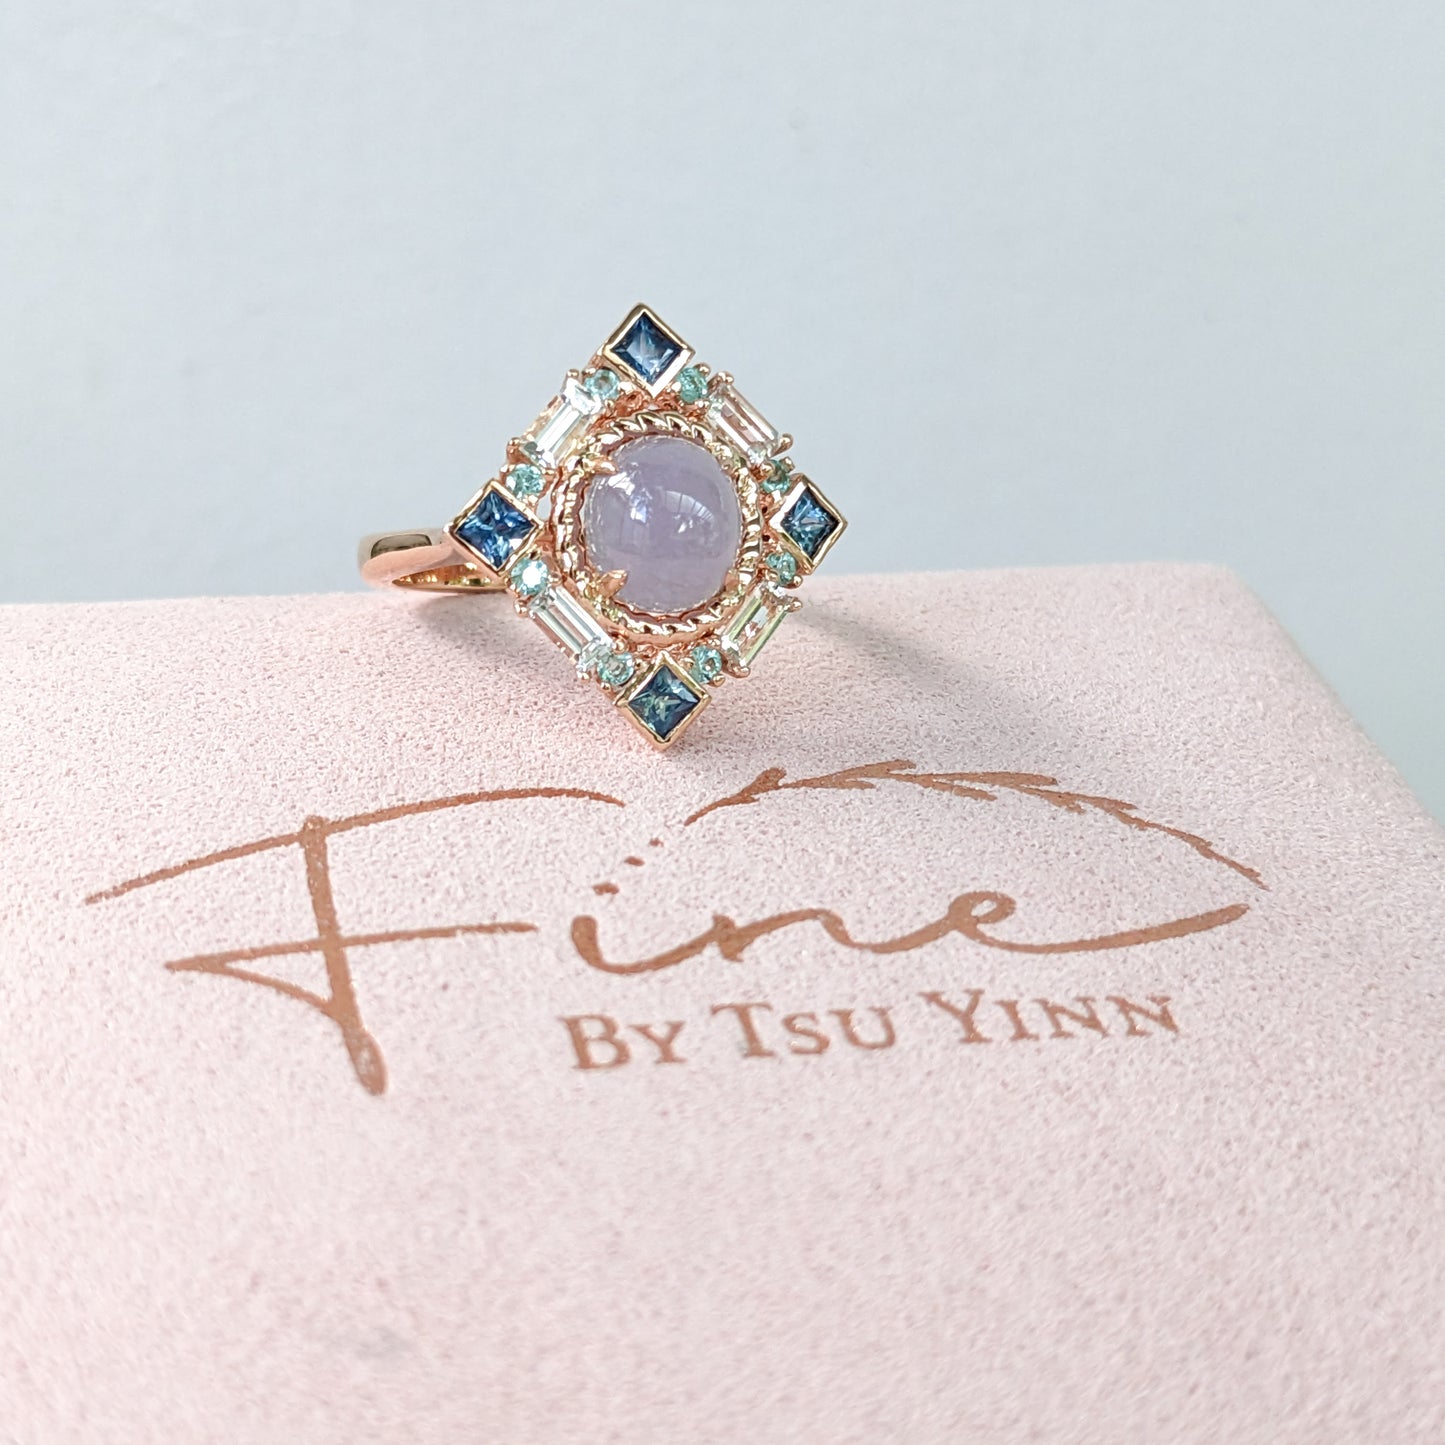 RG FBTY Brigette Halo Ring with Lavender Jadeite, Paraiba Tourmalines, and Teal and White Sapphires